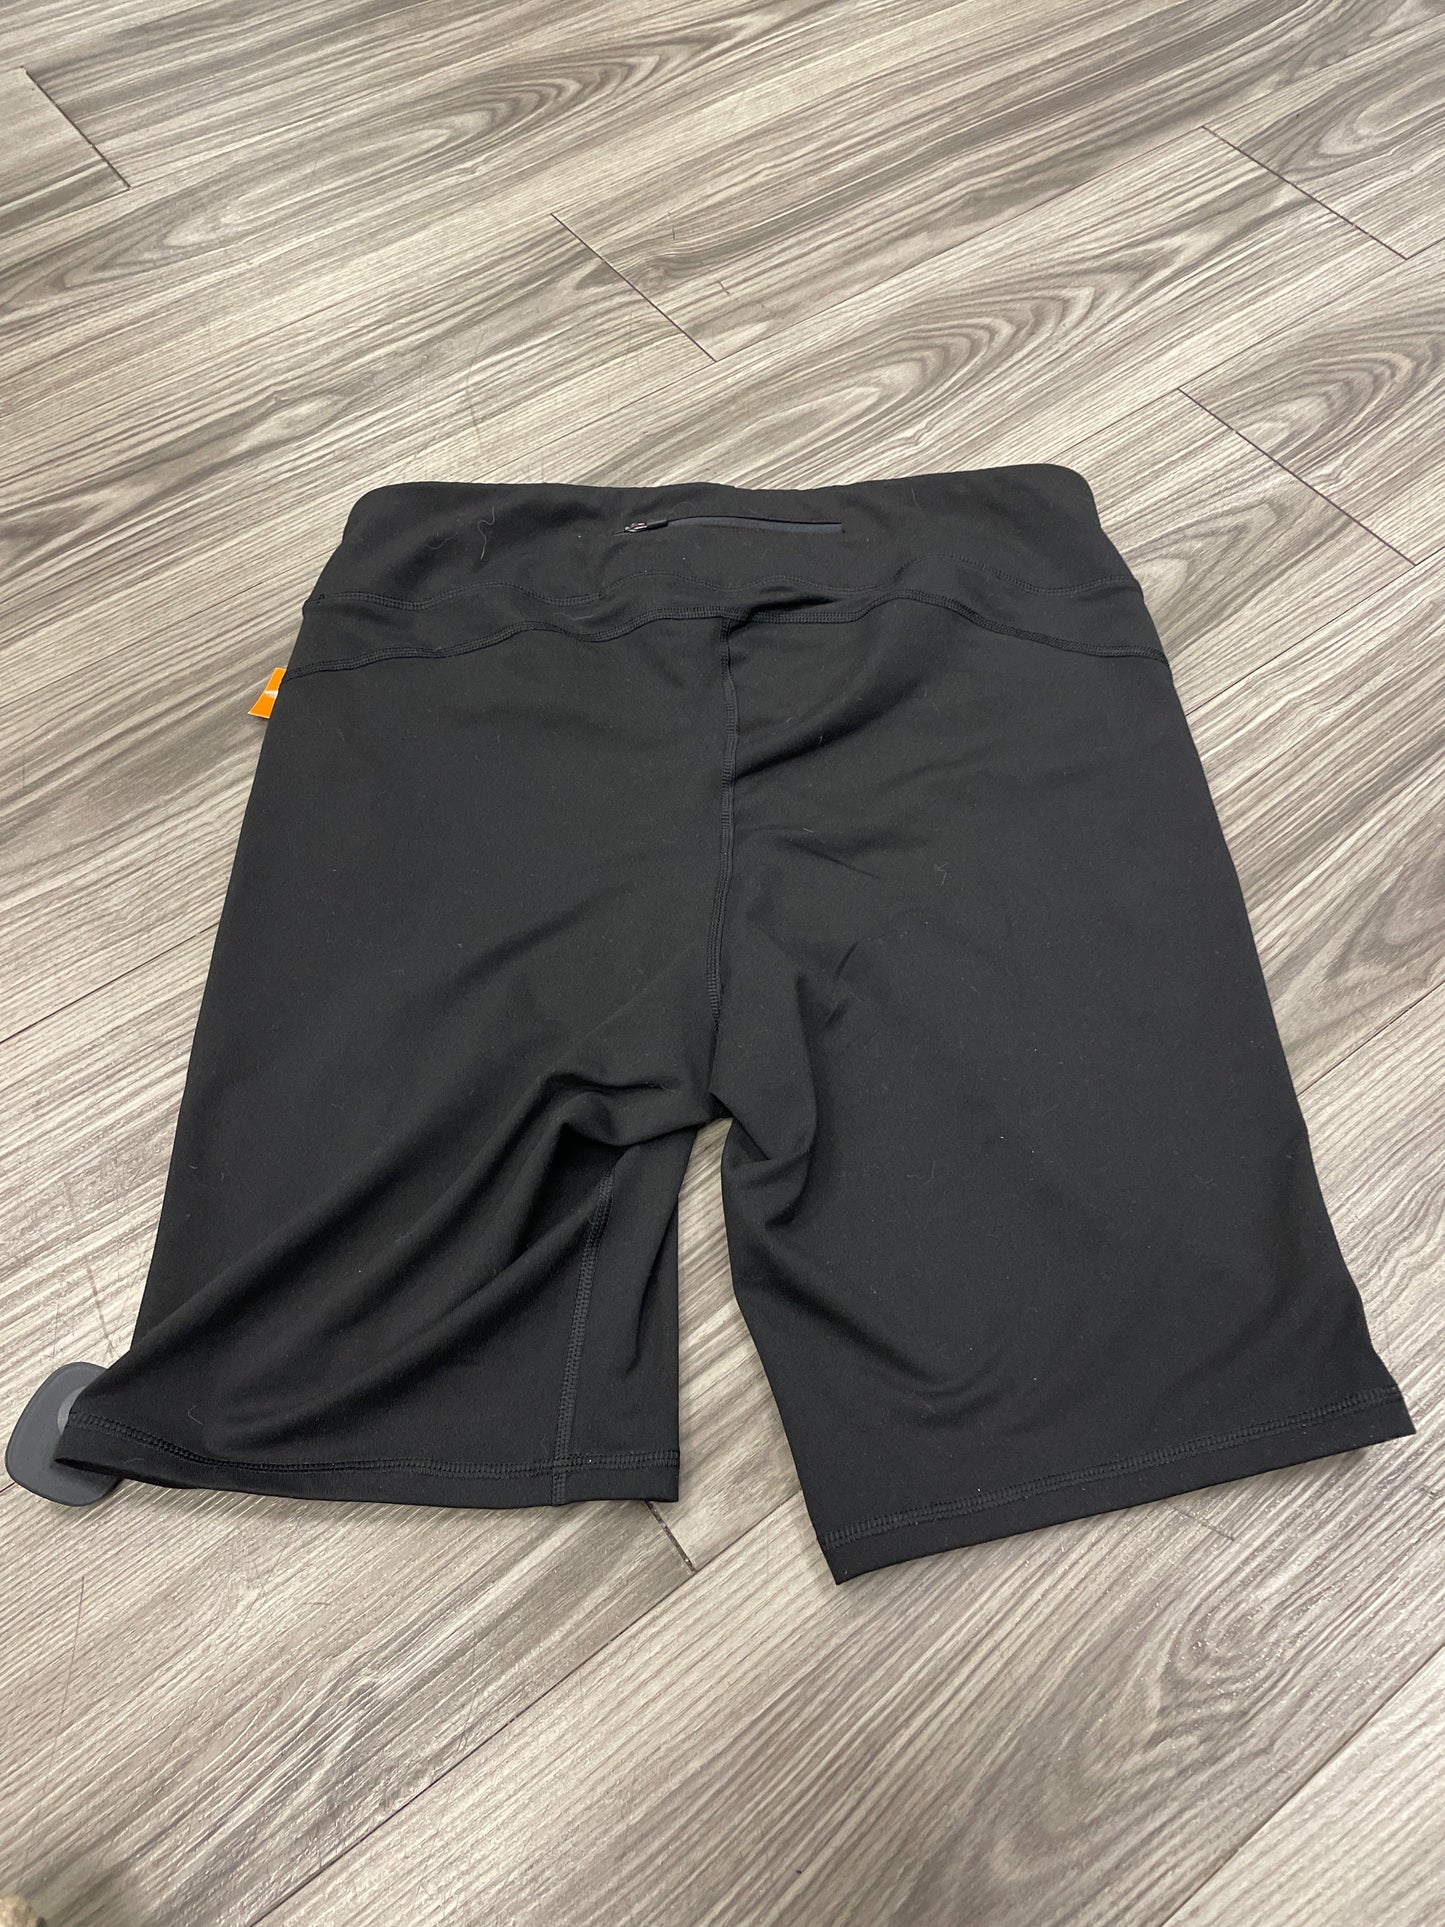 Athletic Shorts By Old Navy  Size: 2x